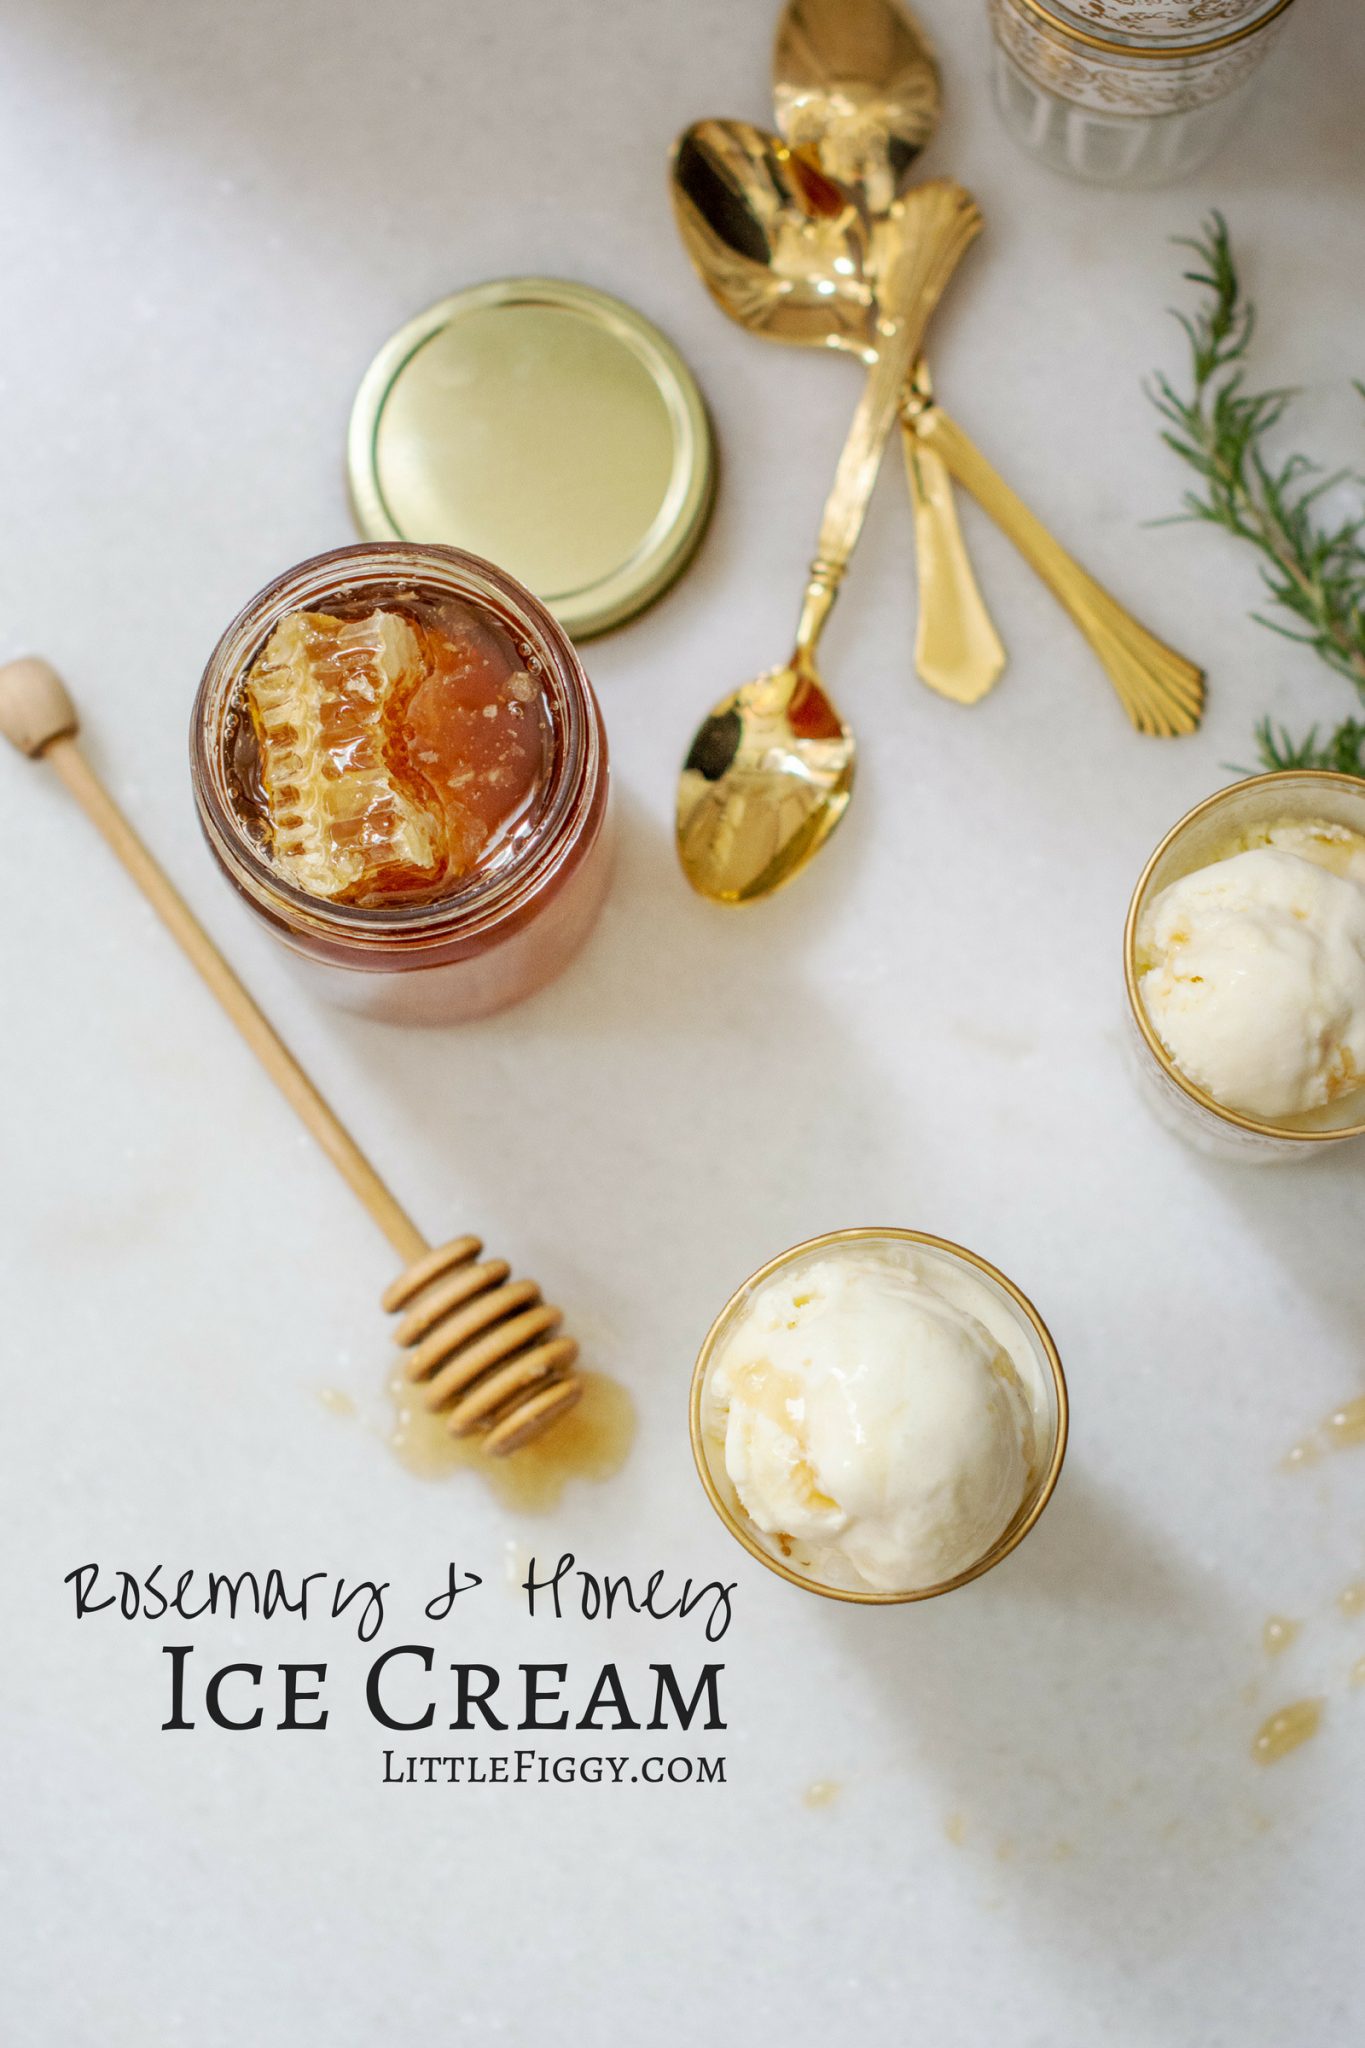 Rosemary and Honey Ice Cream with an extra drizzle of honey.